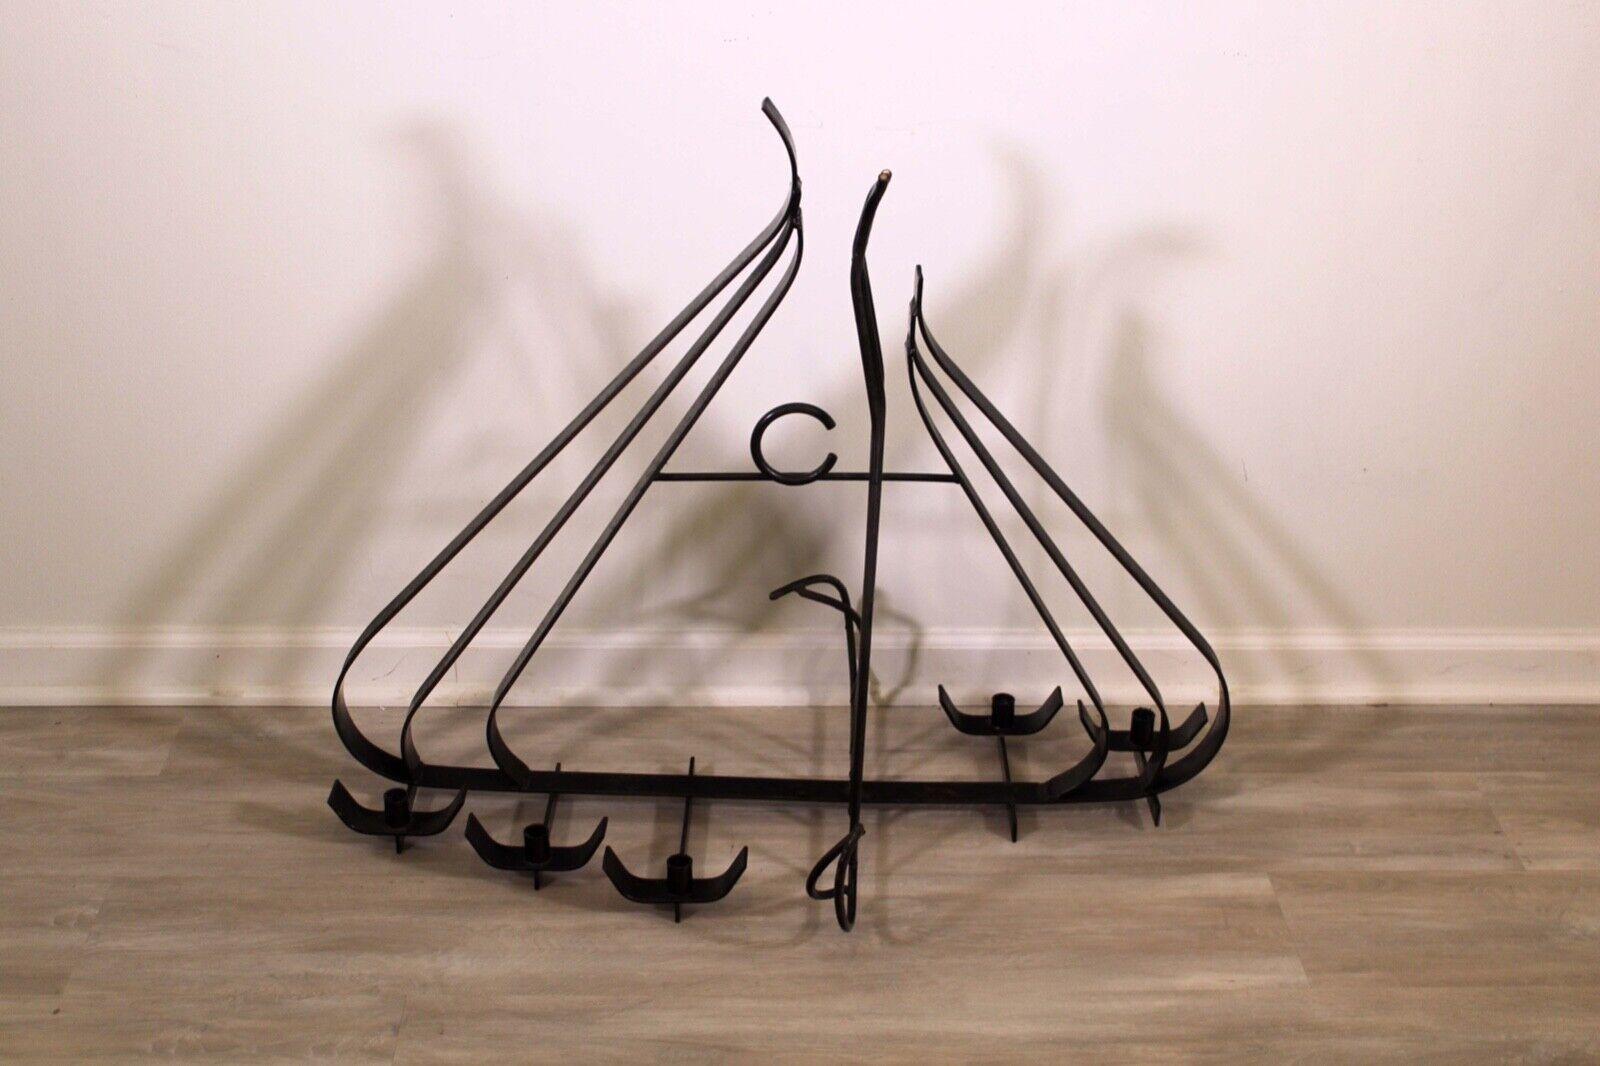 This unique danish floor table candle holder up for consideration. The wrought iron used to create this candle holder gives it the ultimate handmade look. This piece would fit beautifully in any home! In very good condition. Dimensions: 38